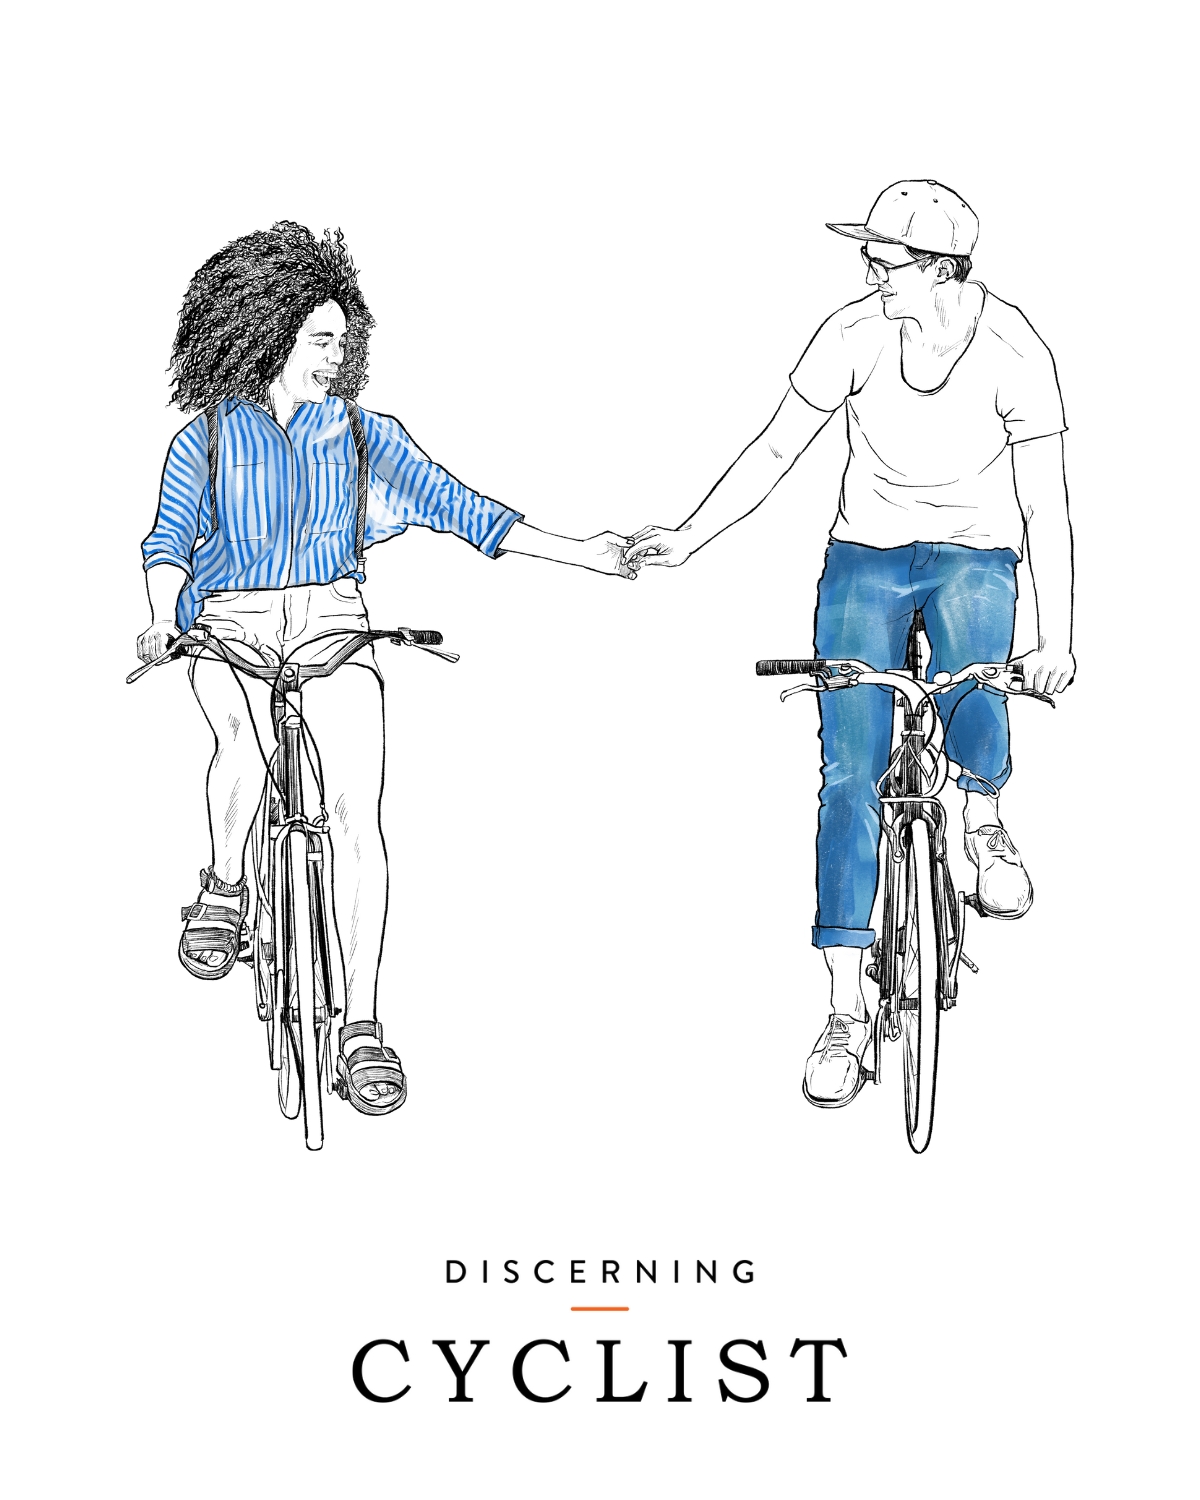 Cycling couple illustration